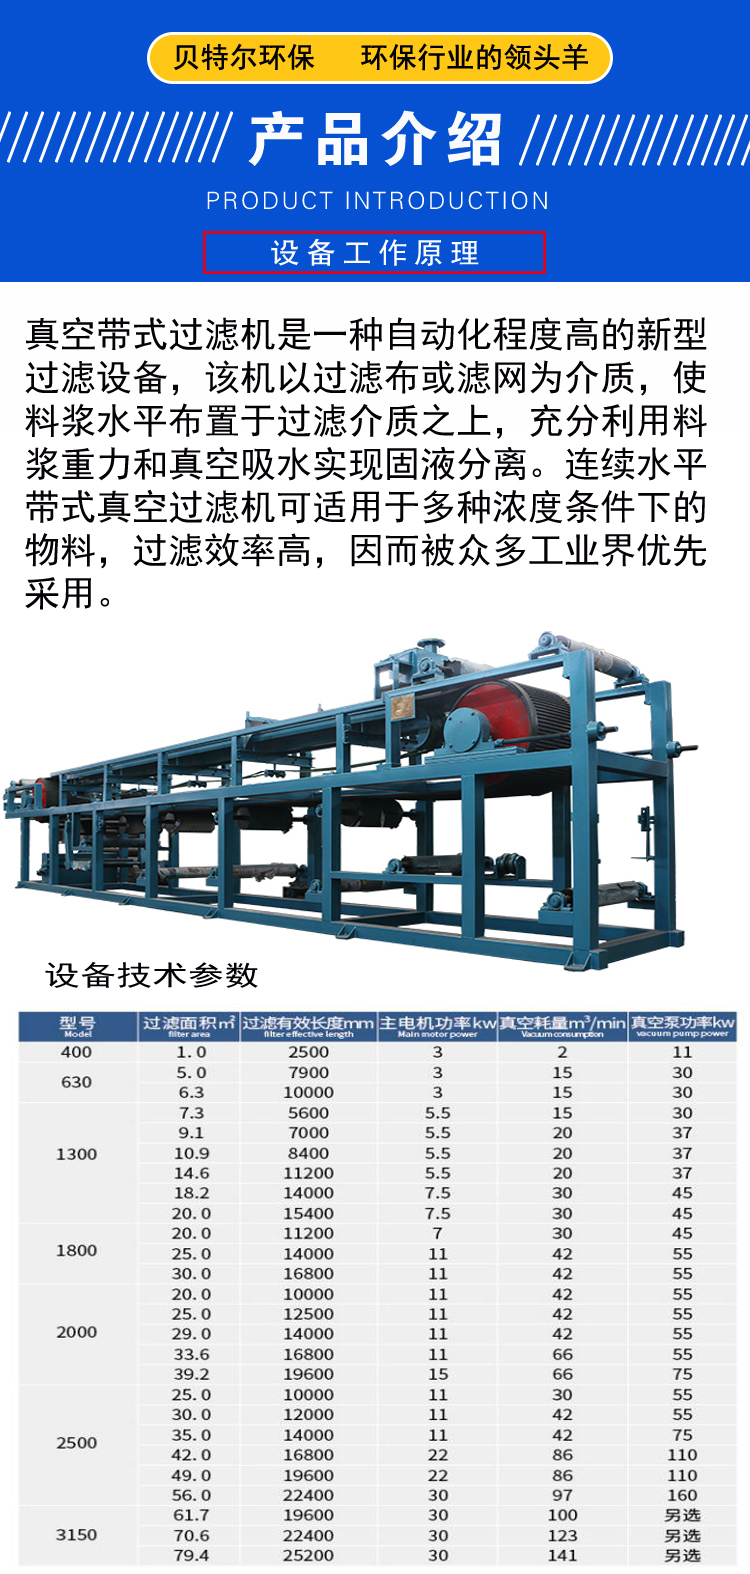 Selected tailings belt vacuum filter, fly ash dewatering treatment equipment, continuous automatic belt filtration equipment